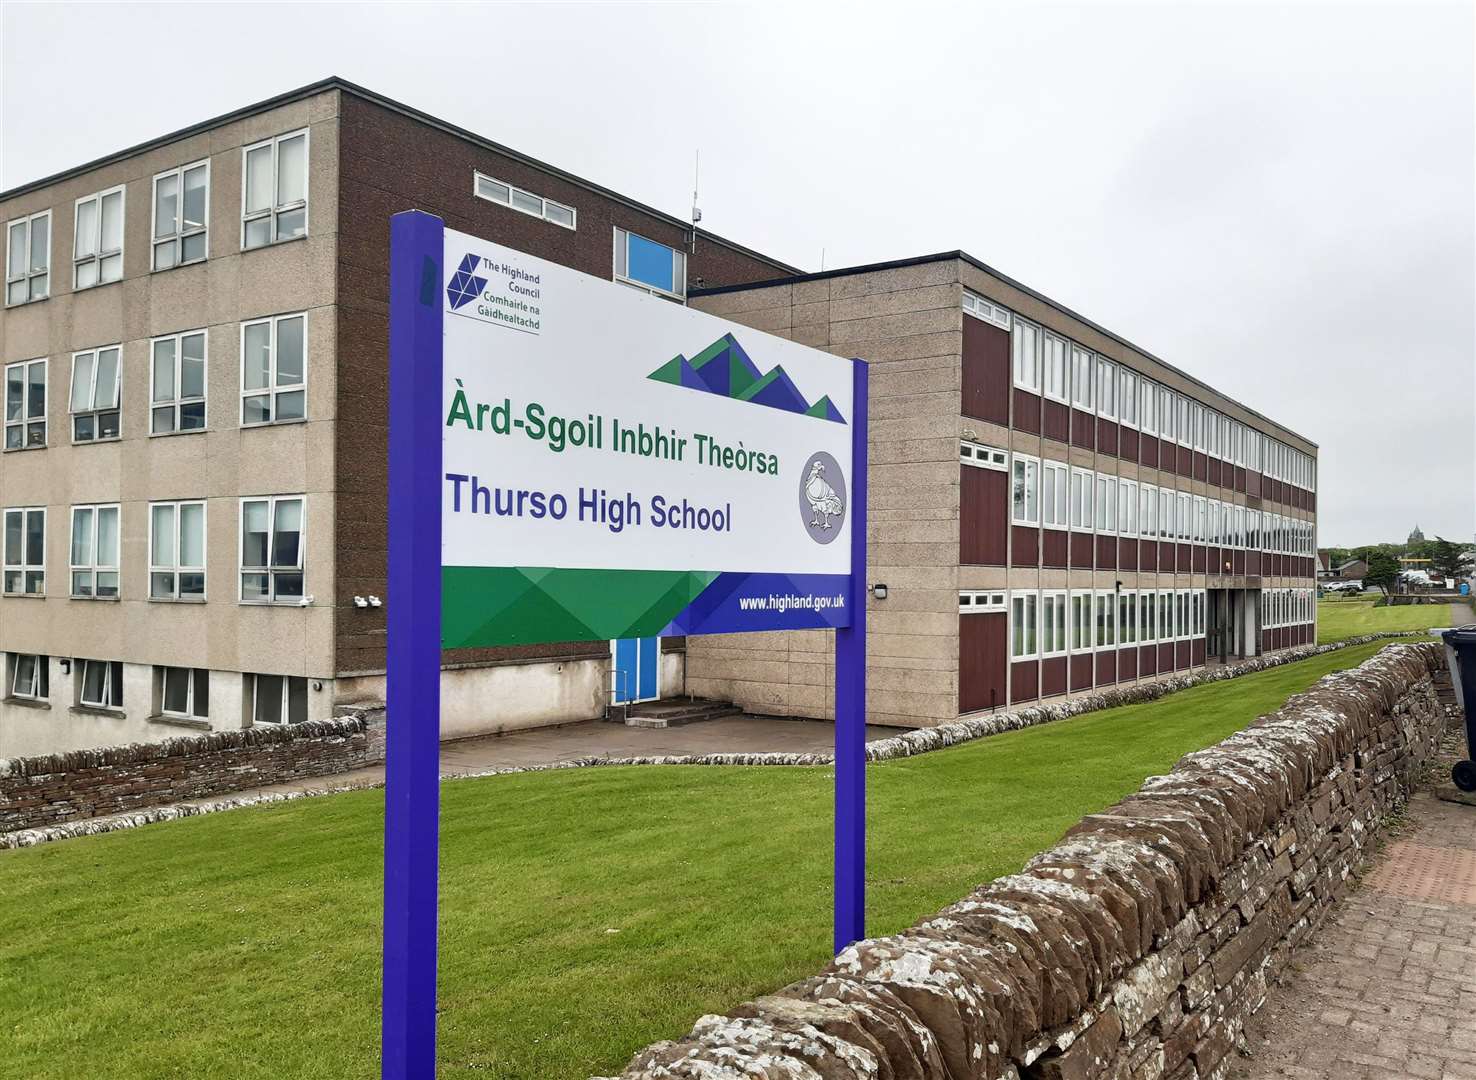 Caithness councillors had agreed to replace the condemned block at Thurso High School at a cost of £7.5m – but area committees do not hold such sway over infrastructure budgets.